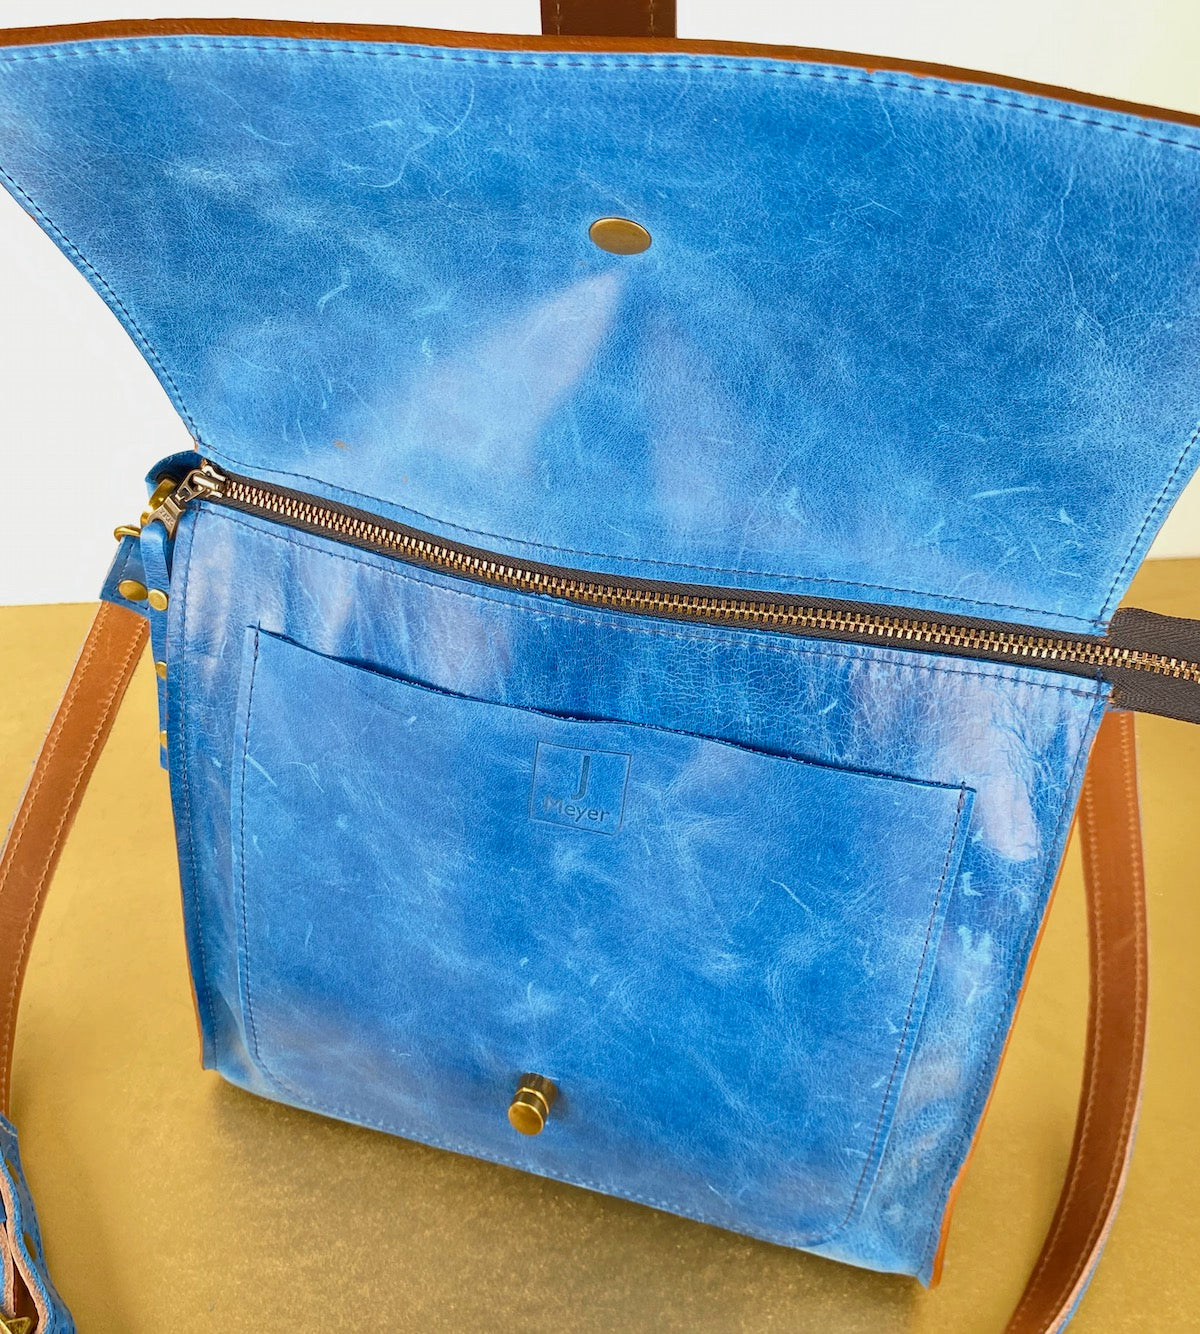 Blue Leather Satchel Purse with Suede Ribbon Adjustable Strap